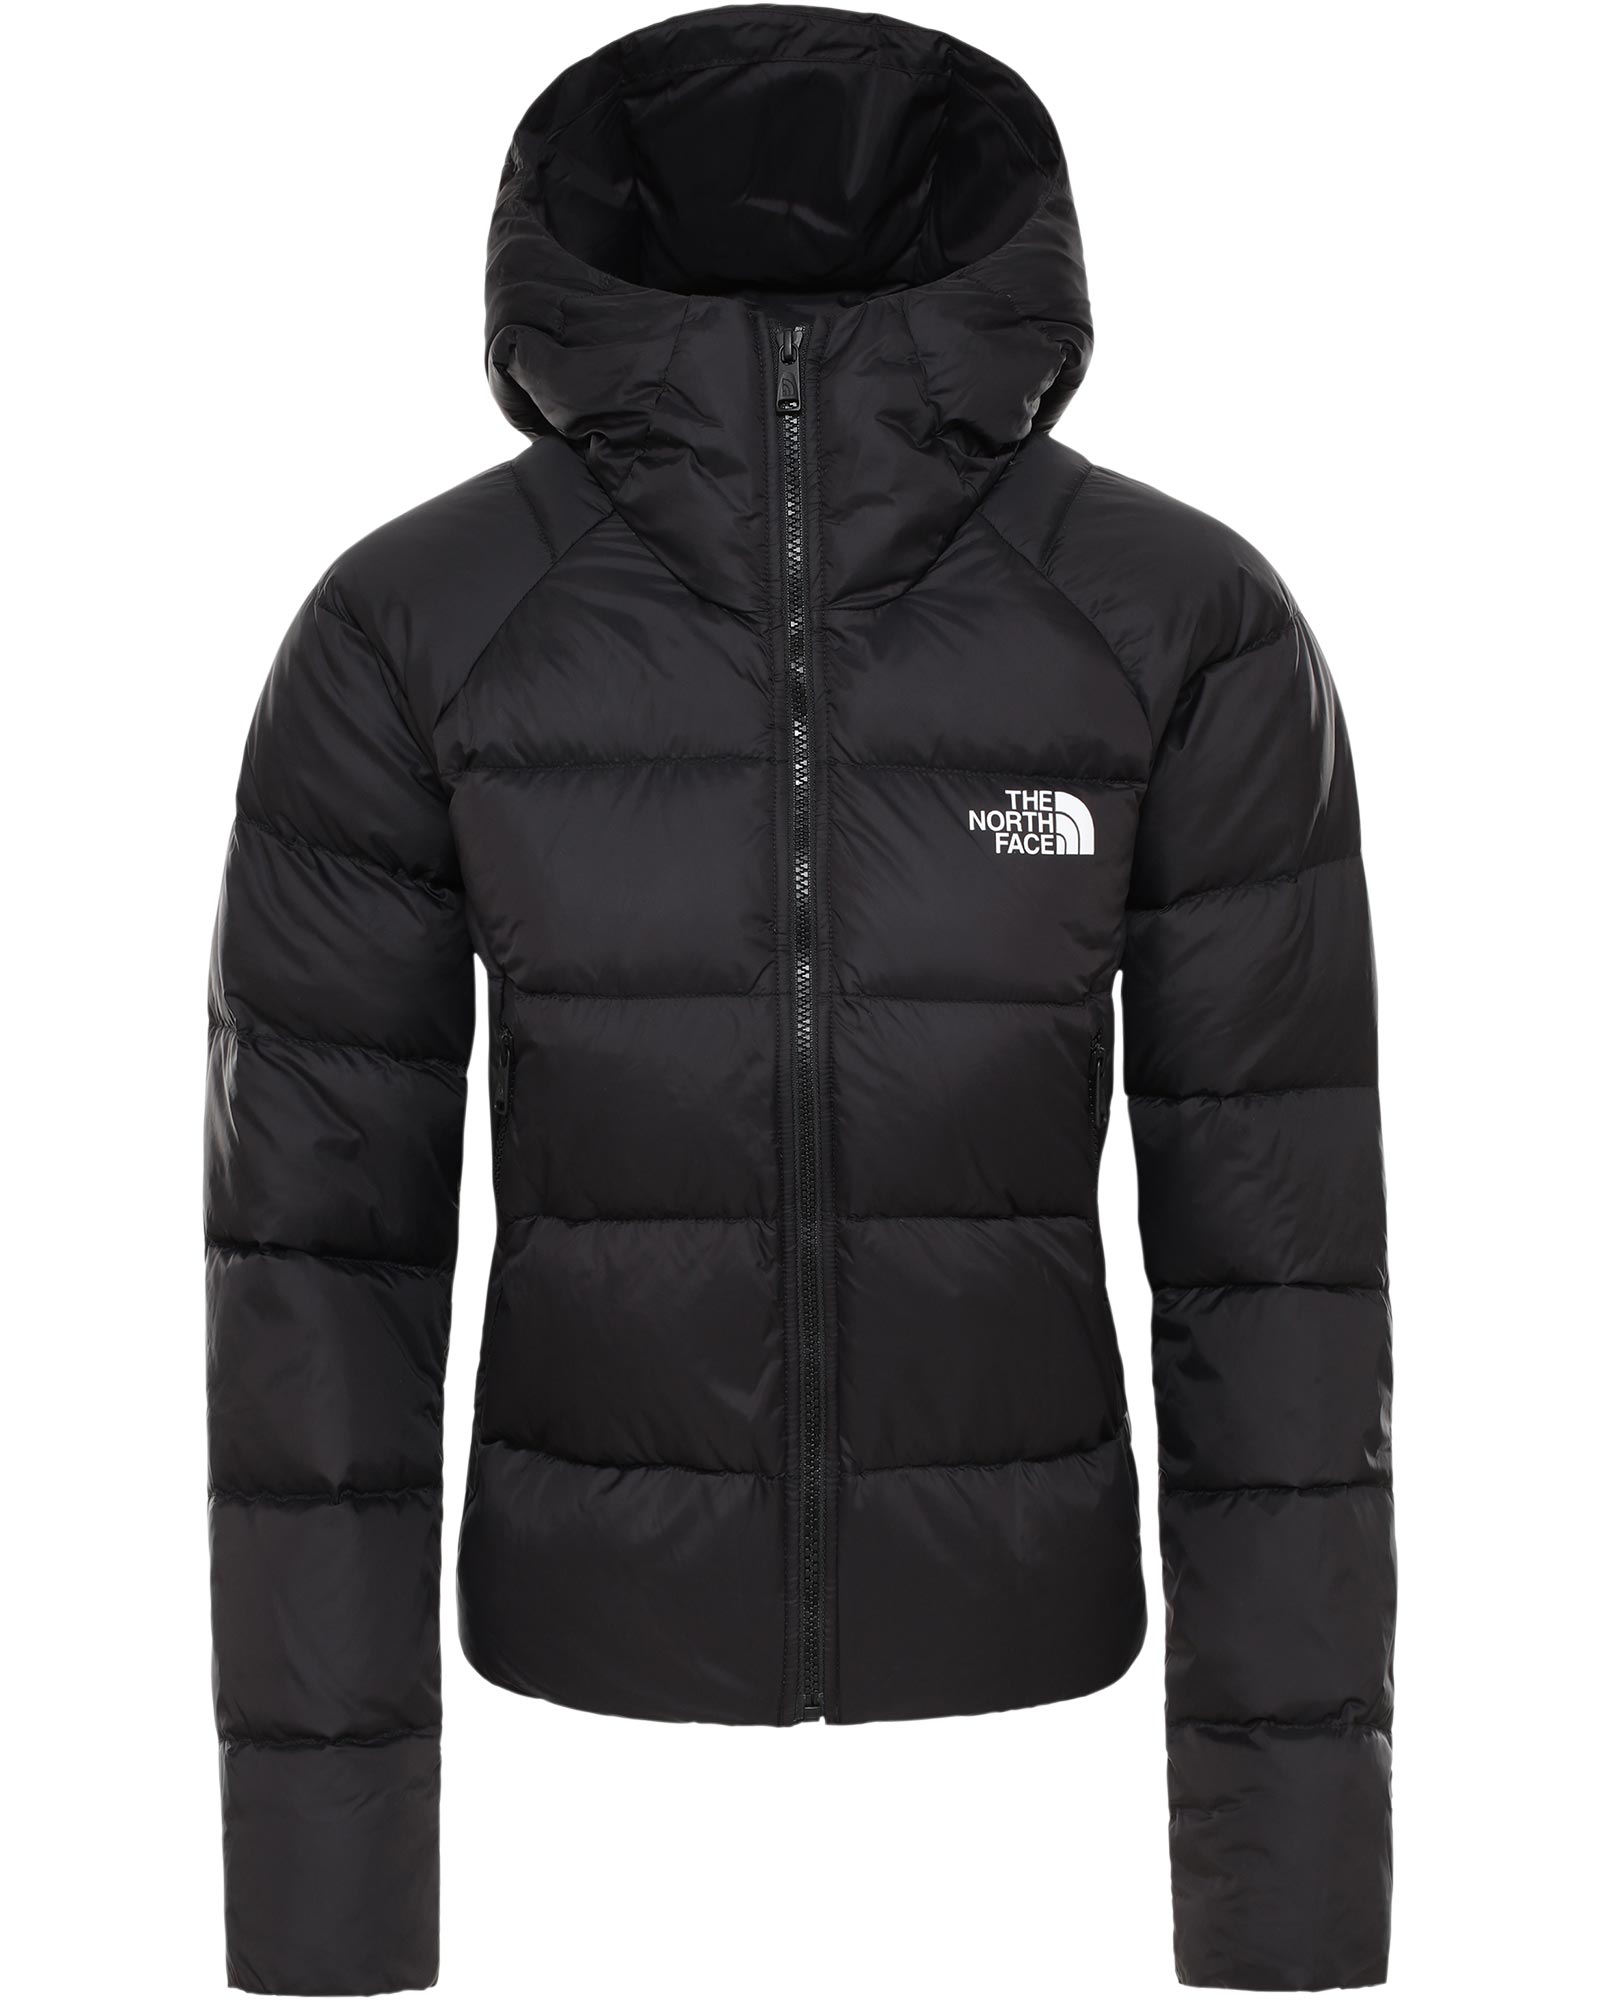 The North Face Hyalite Women’s Down Hoodie - TNF Black S